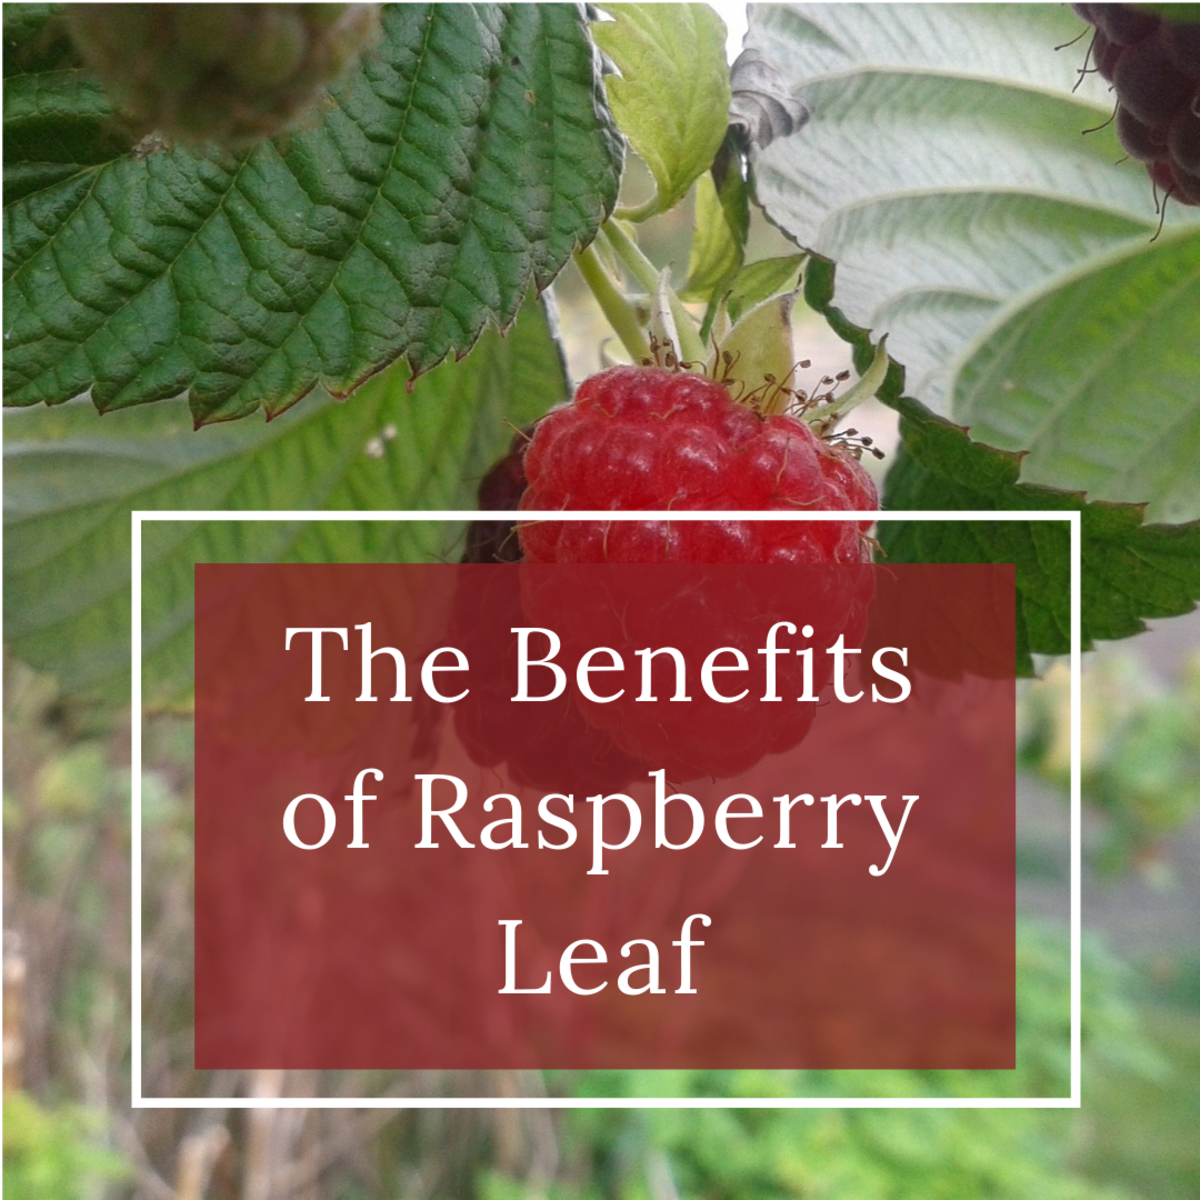 The benefits of raspberry leaf will surprise you!